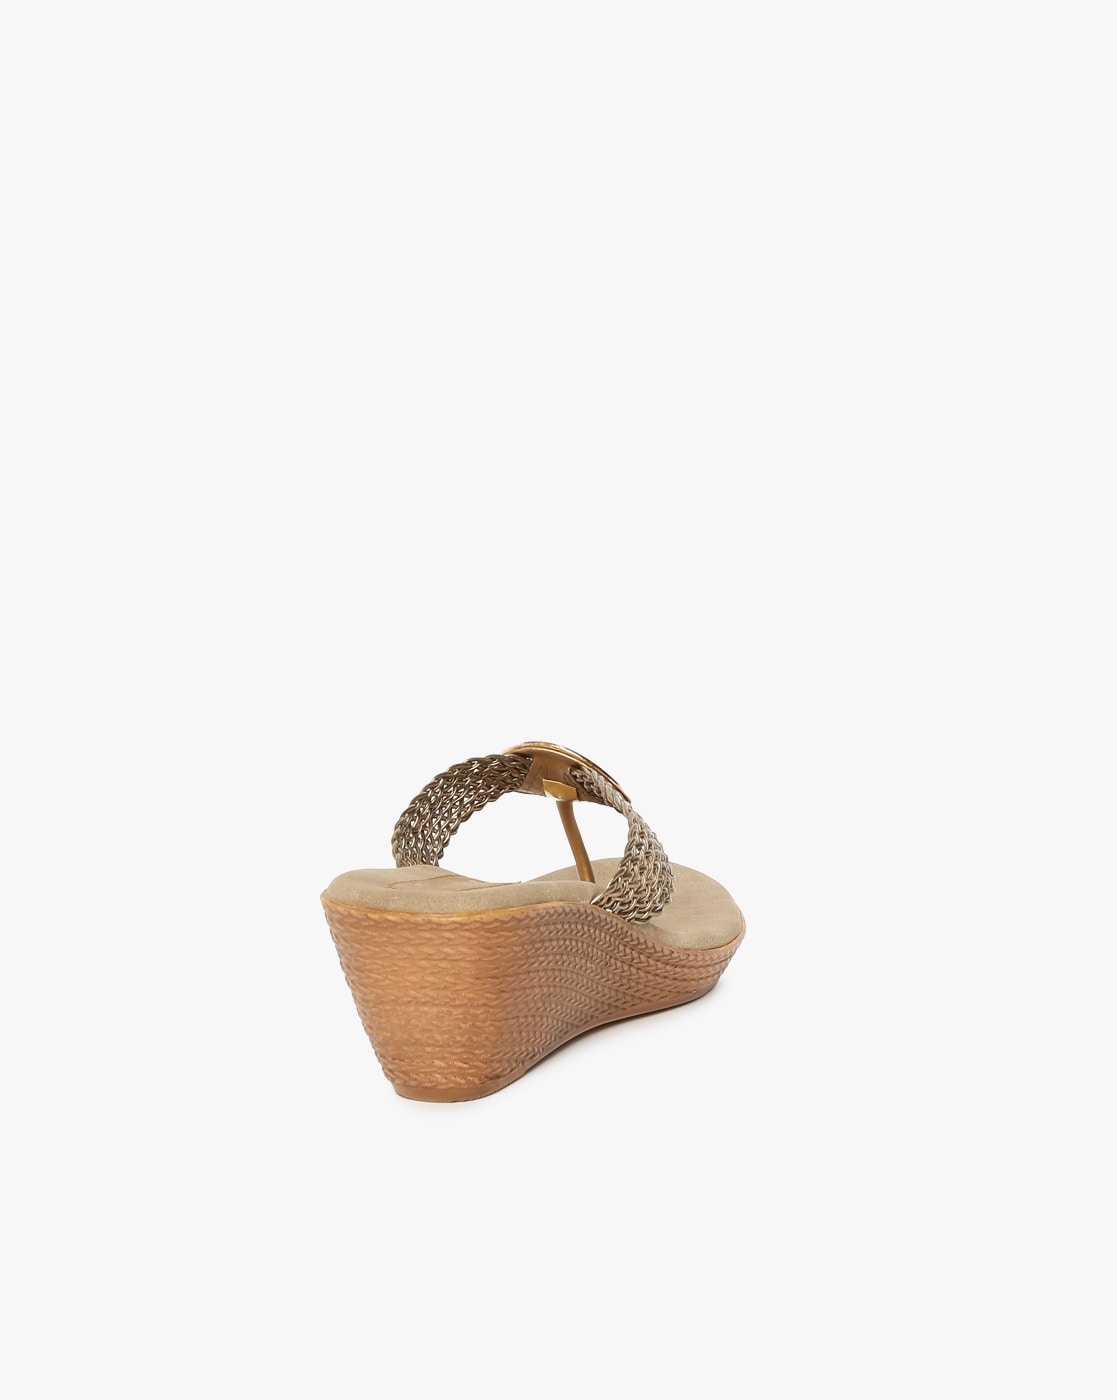 Shop Olivia Trapeze Heels Sandals by SOLE HOUSE at House of Designers –  HOUSE OF DESIGNERS